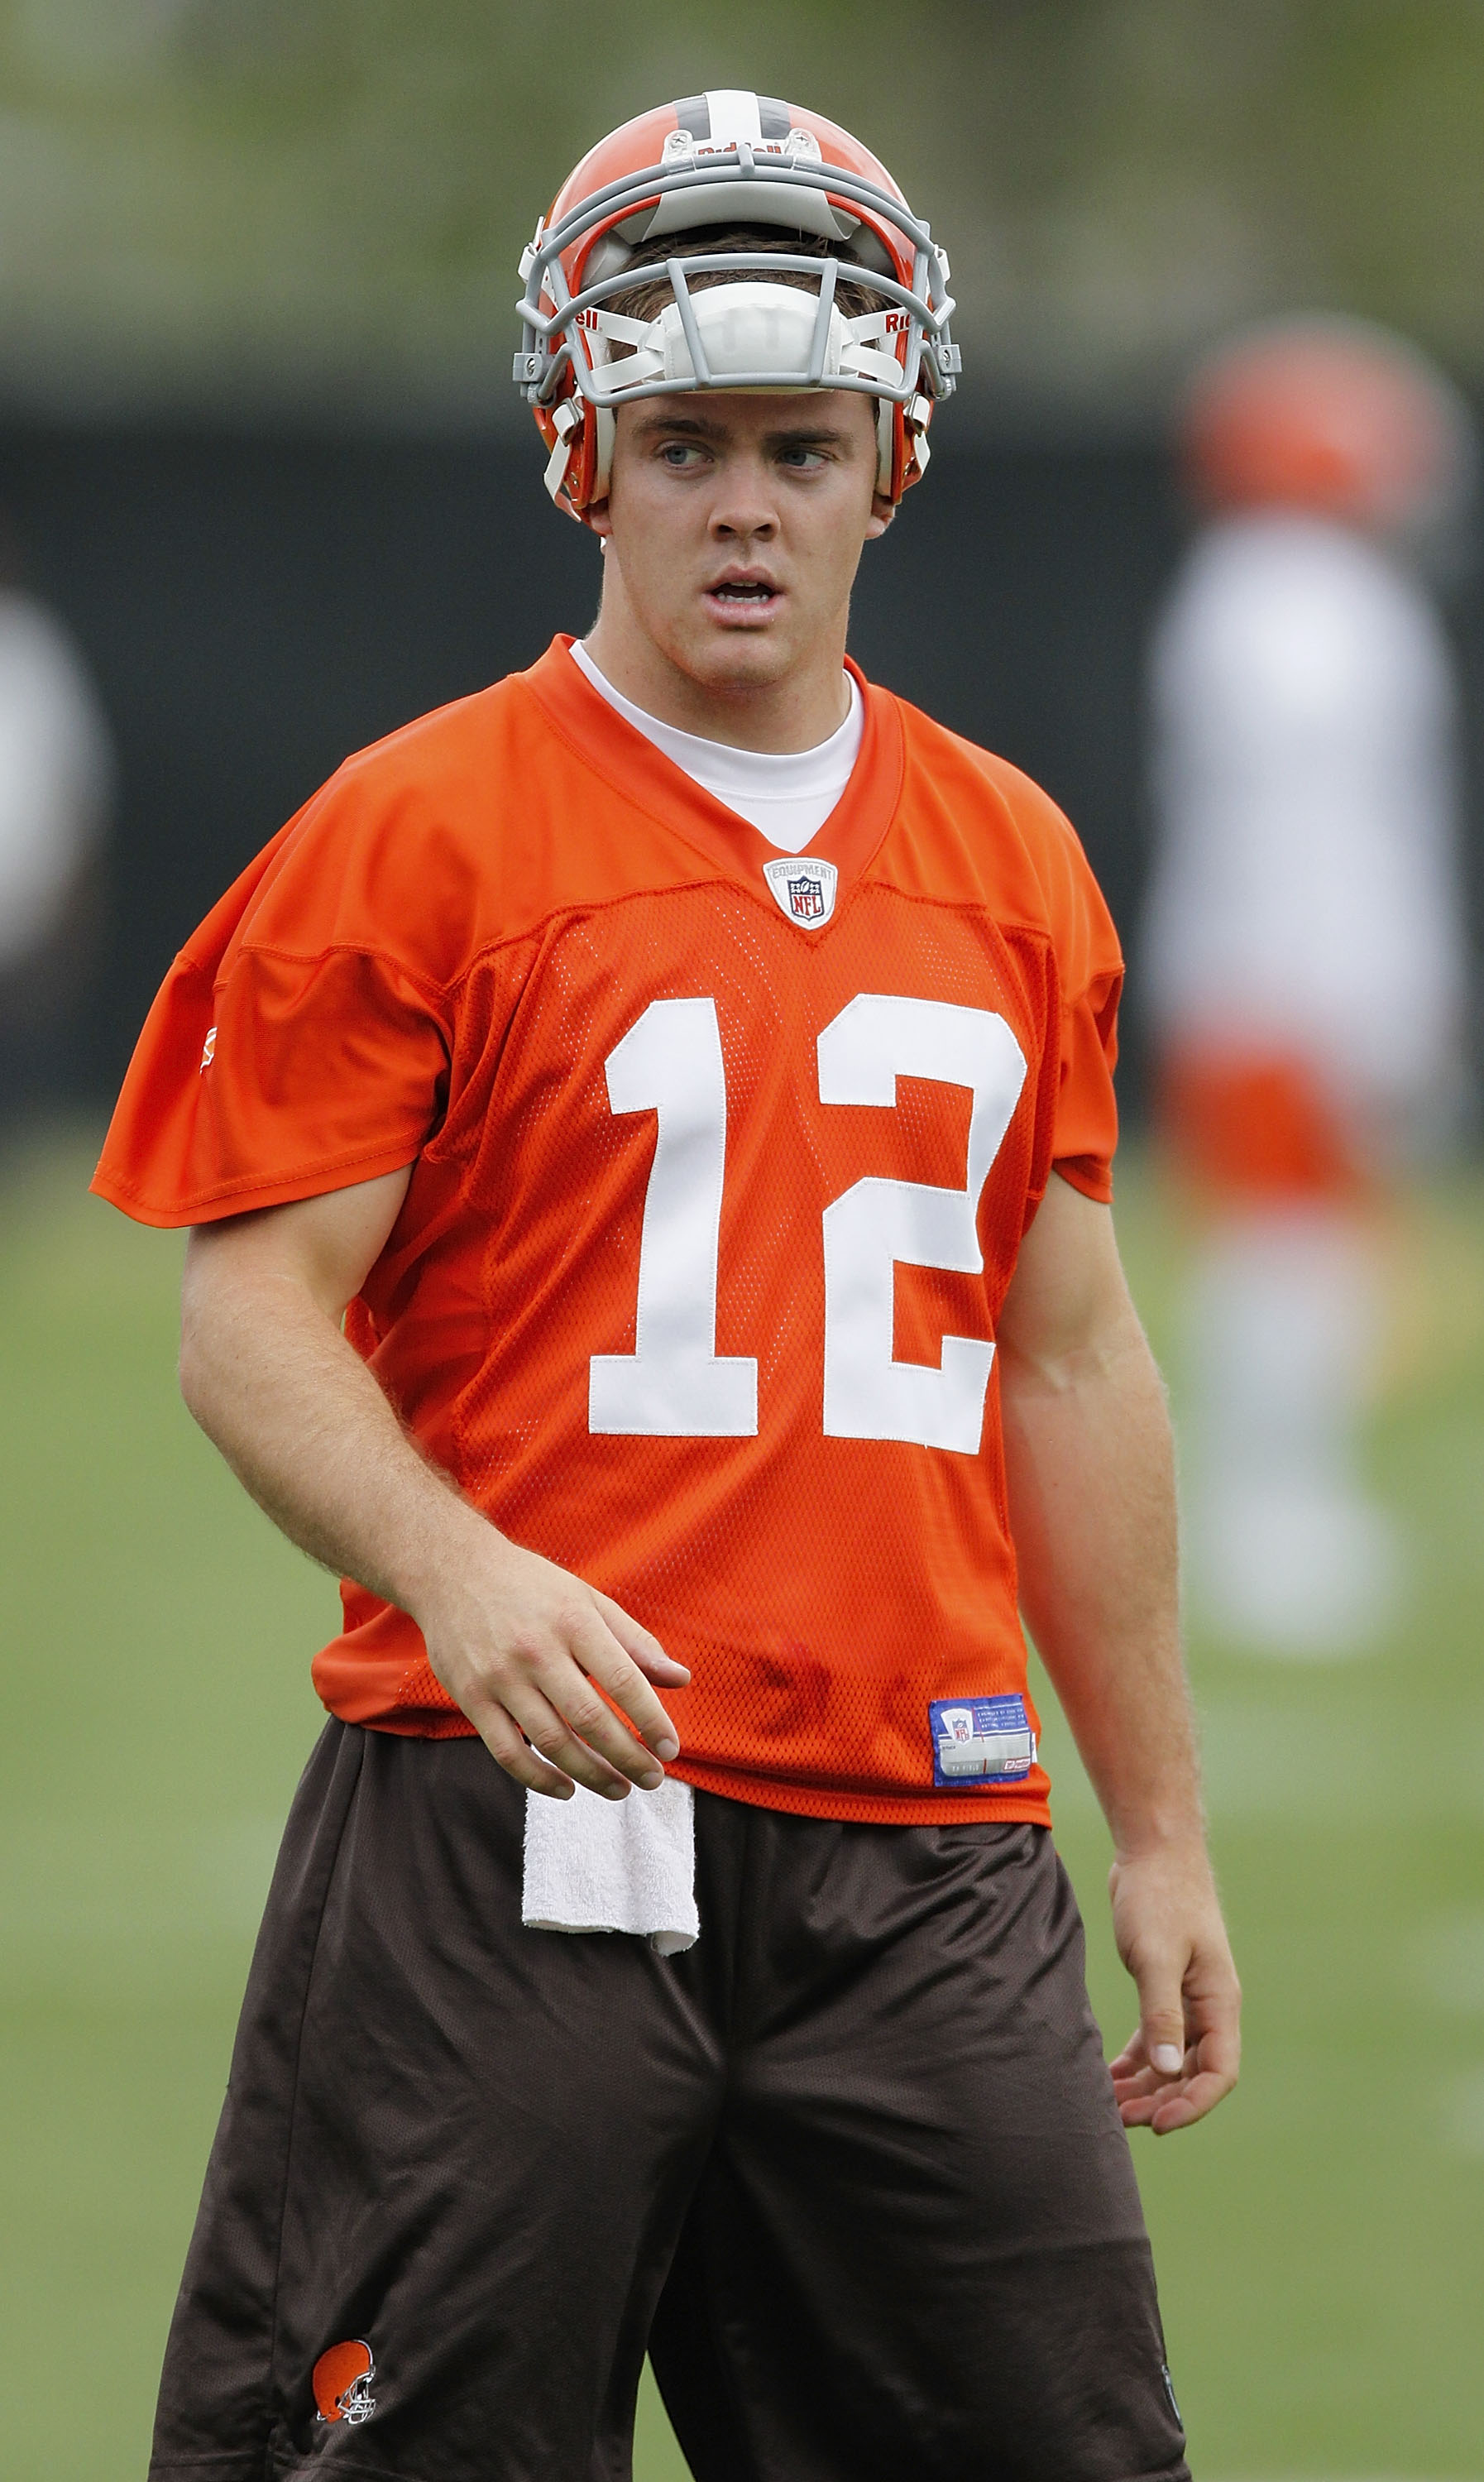 BEREA, OH - MAY 01:  Colt McCoy #12 of the Cleveland Browns looks on during rookie mini camp at the Cleveland Browns Training and Administrative Complex on May 1, 2010 in Berea, Ohio.  (Photo by Gregory Shamus/Getty Images)